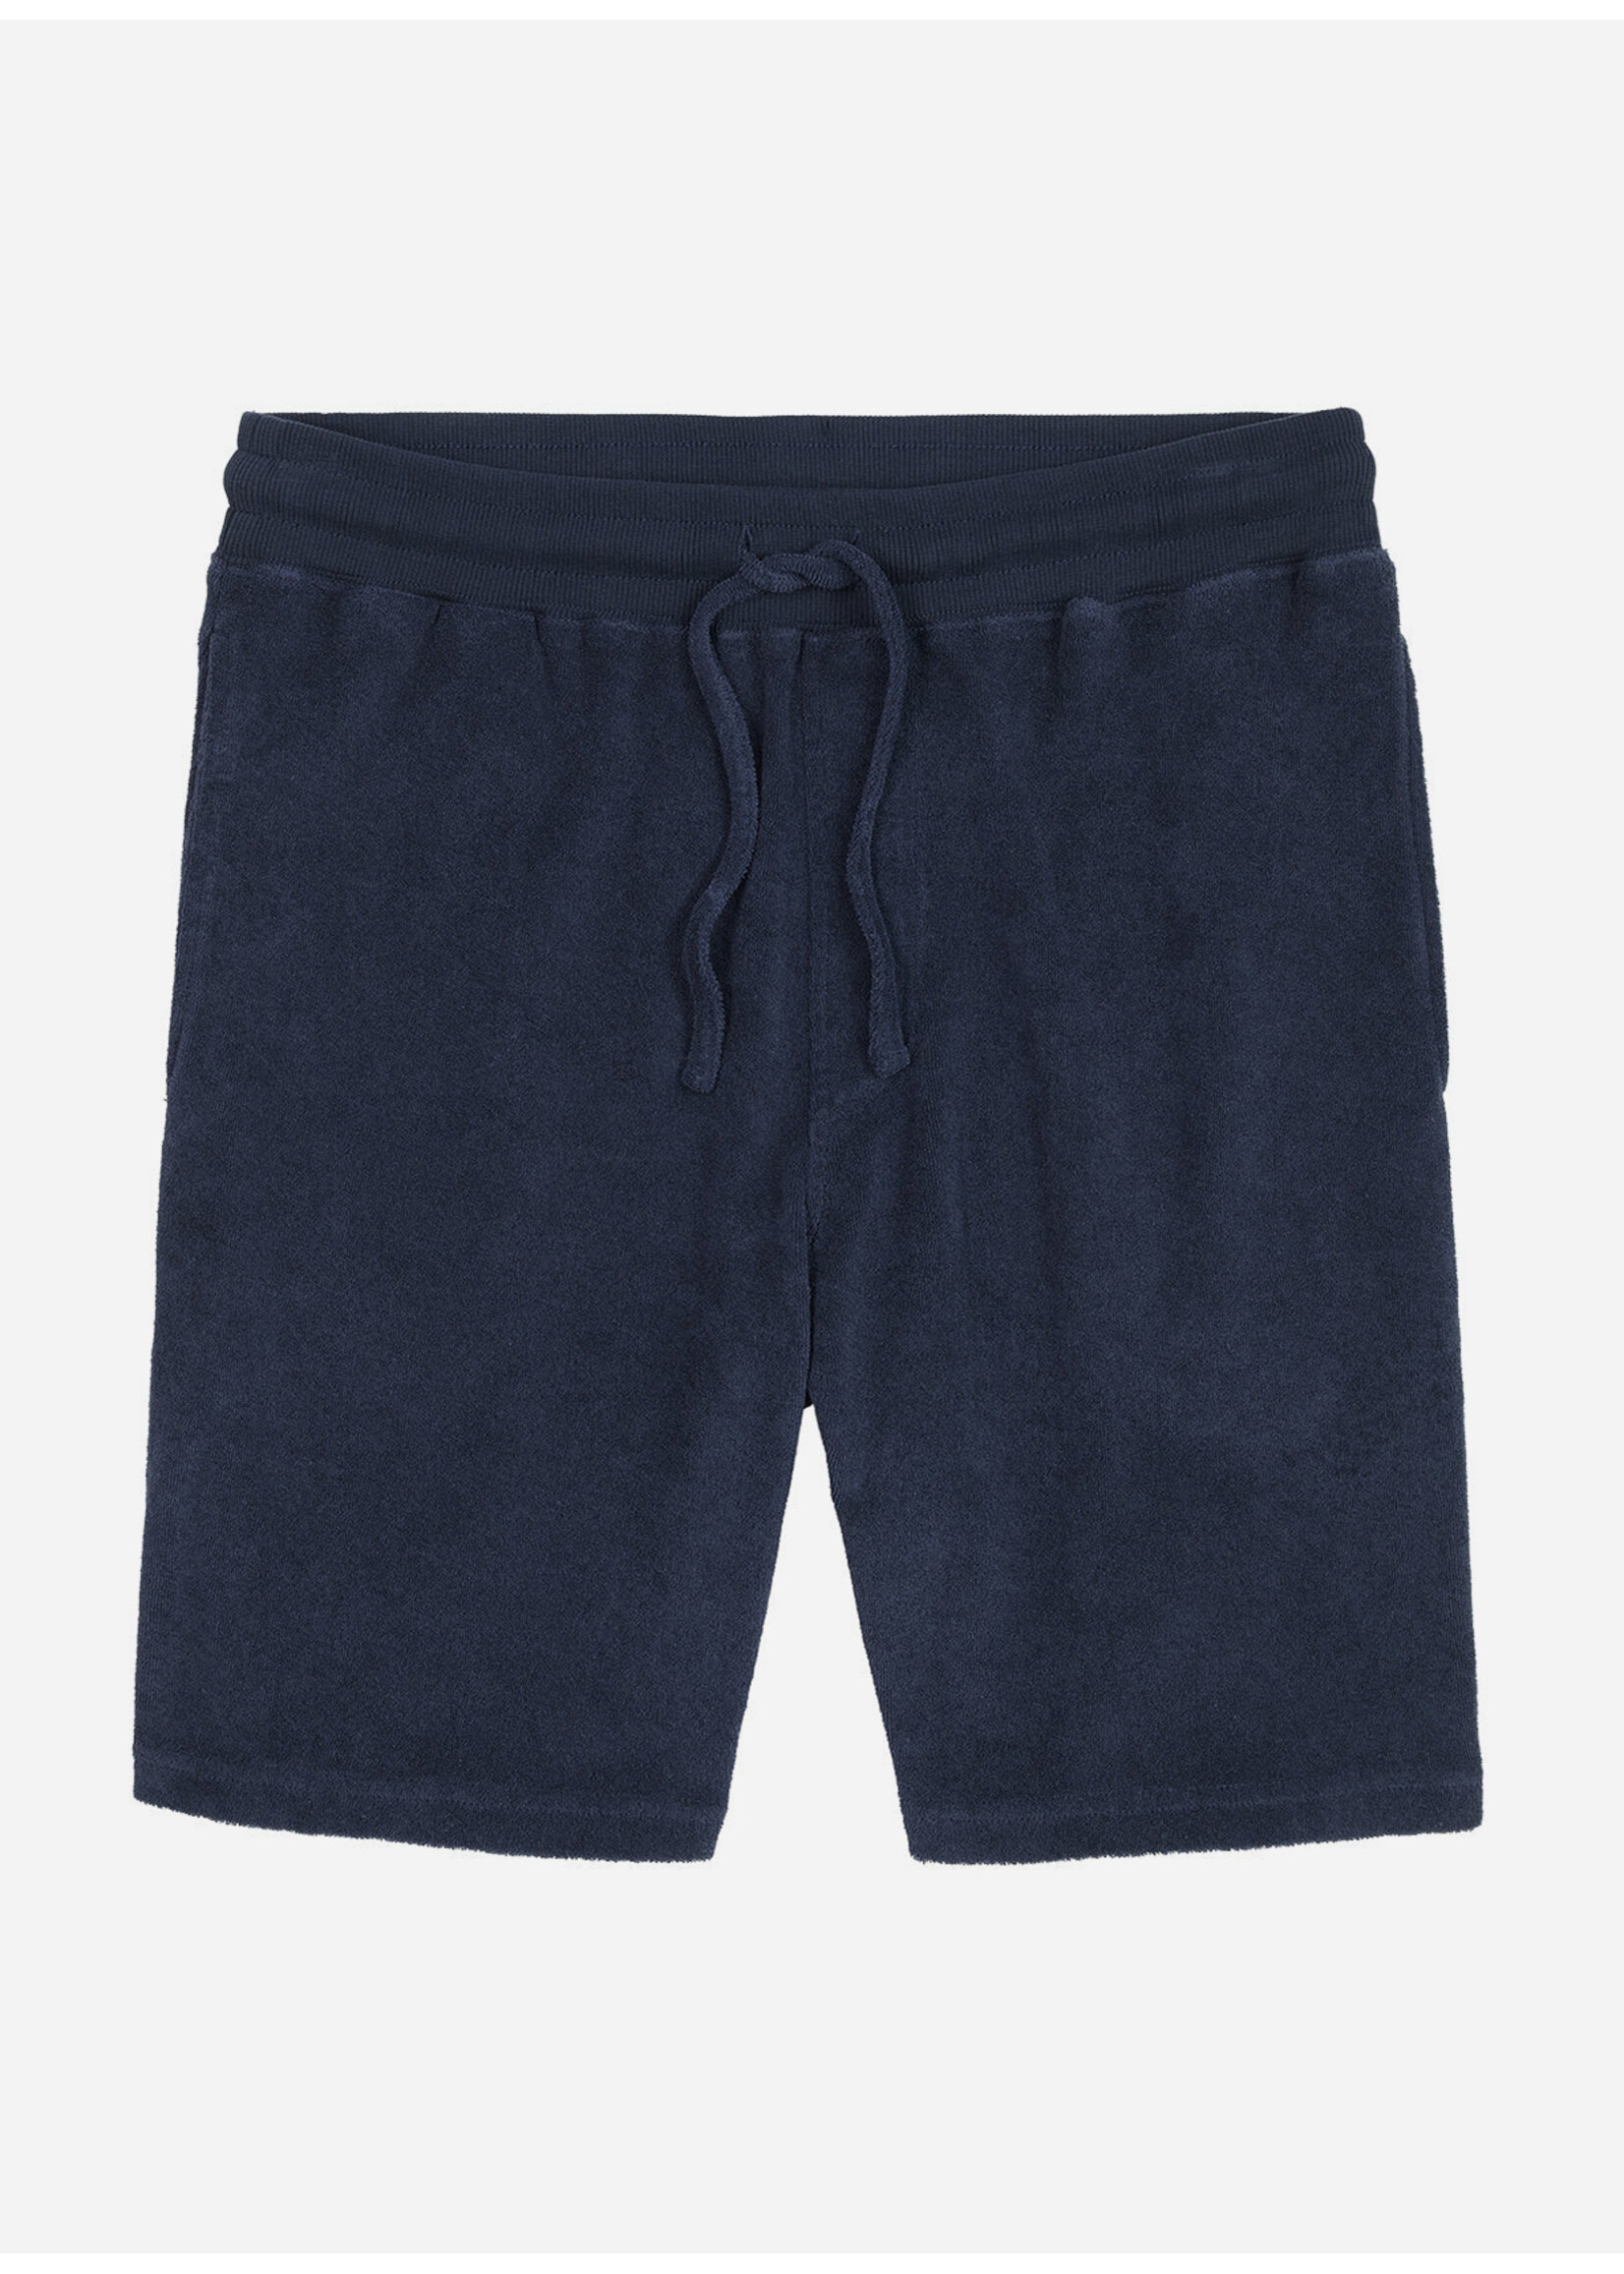 Wahts Day Toweling Shorts Navy Blue